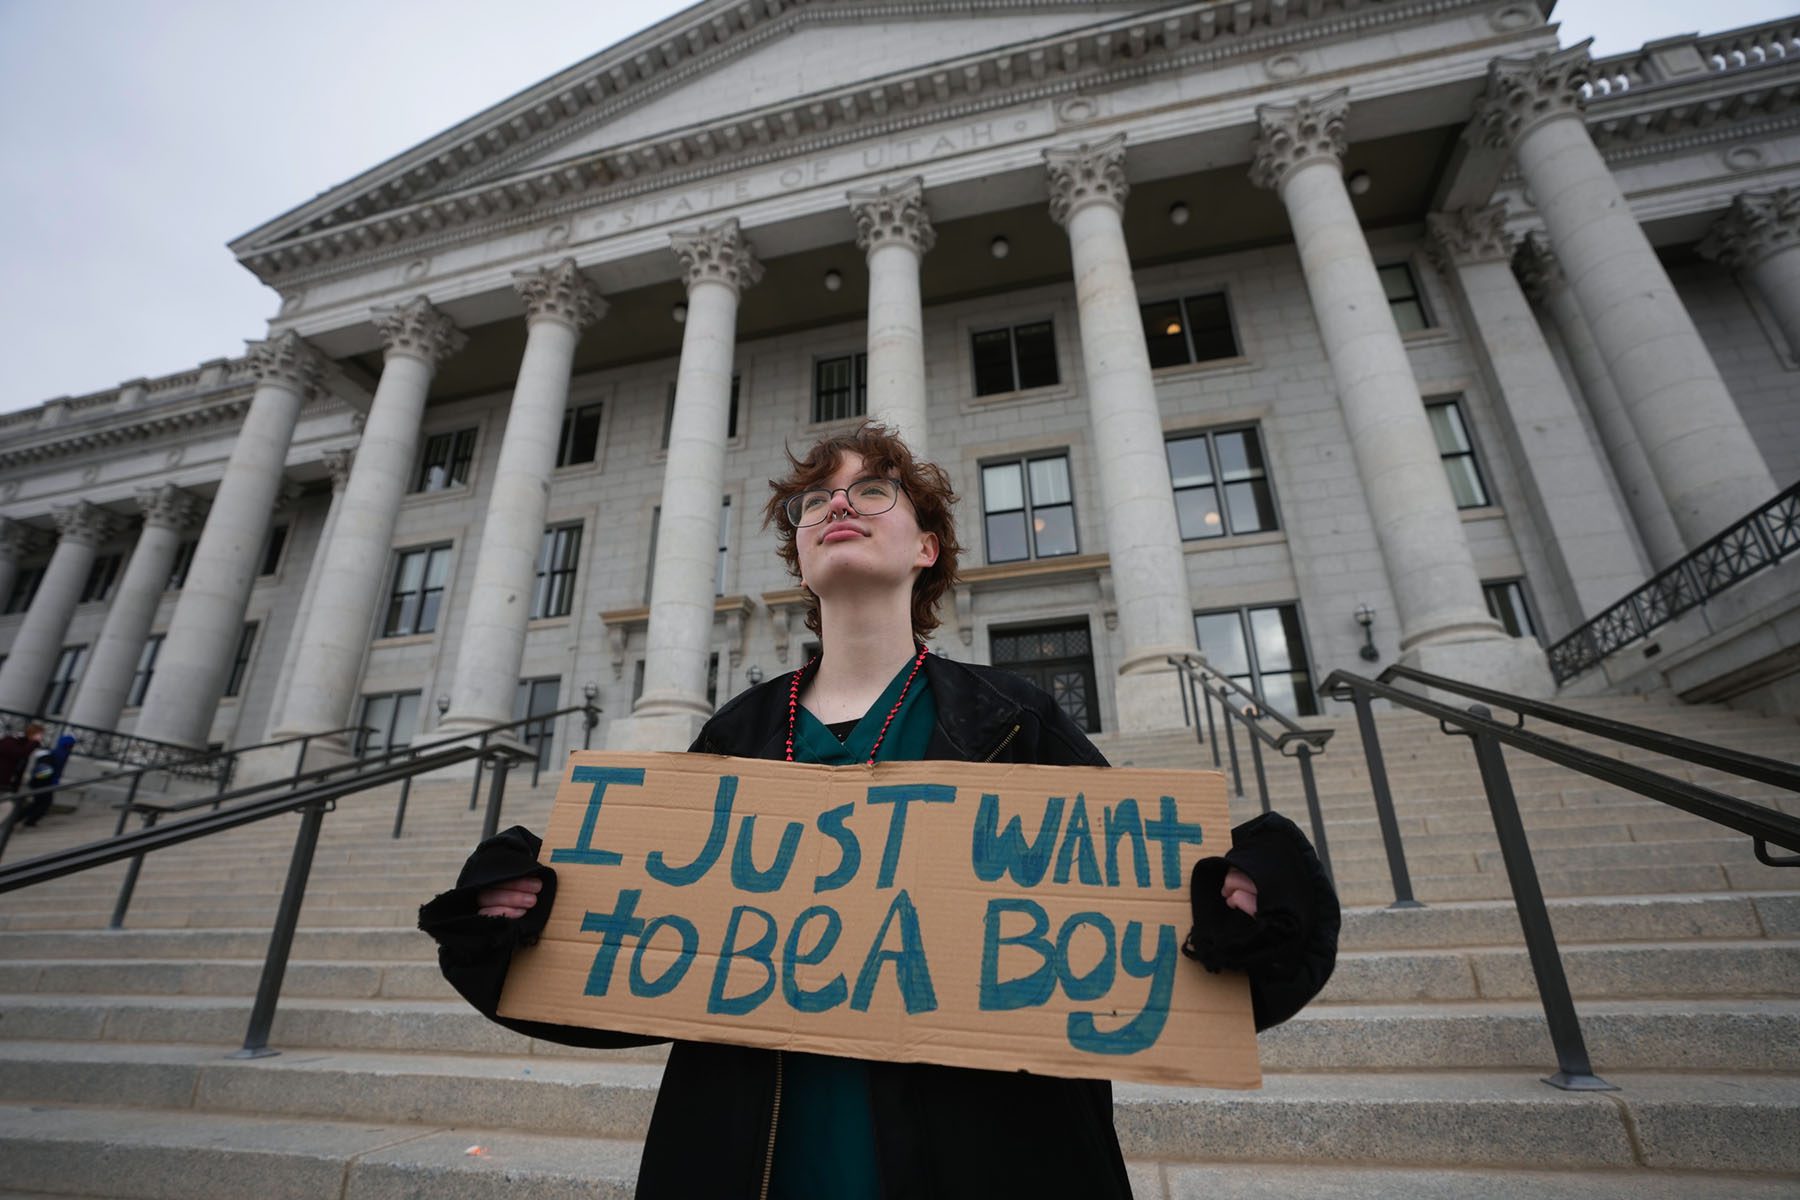 A protester holds a sign that reads "I just want to be a boy" following a rally in front of the Utah State Capitol.